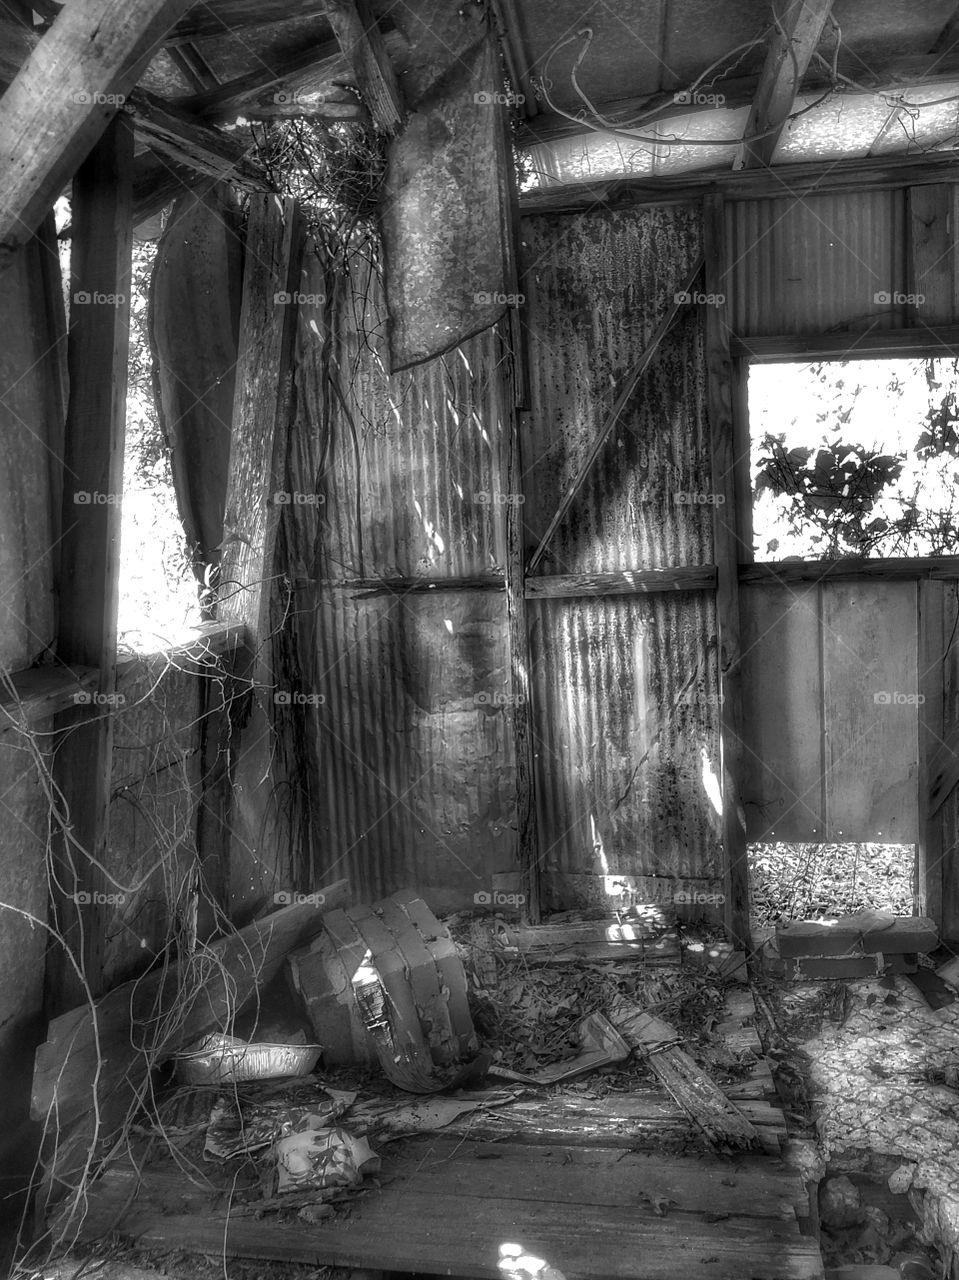 Abandoned Metal Shed 3 (was a converted church classroom for children)